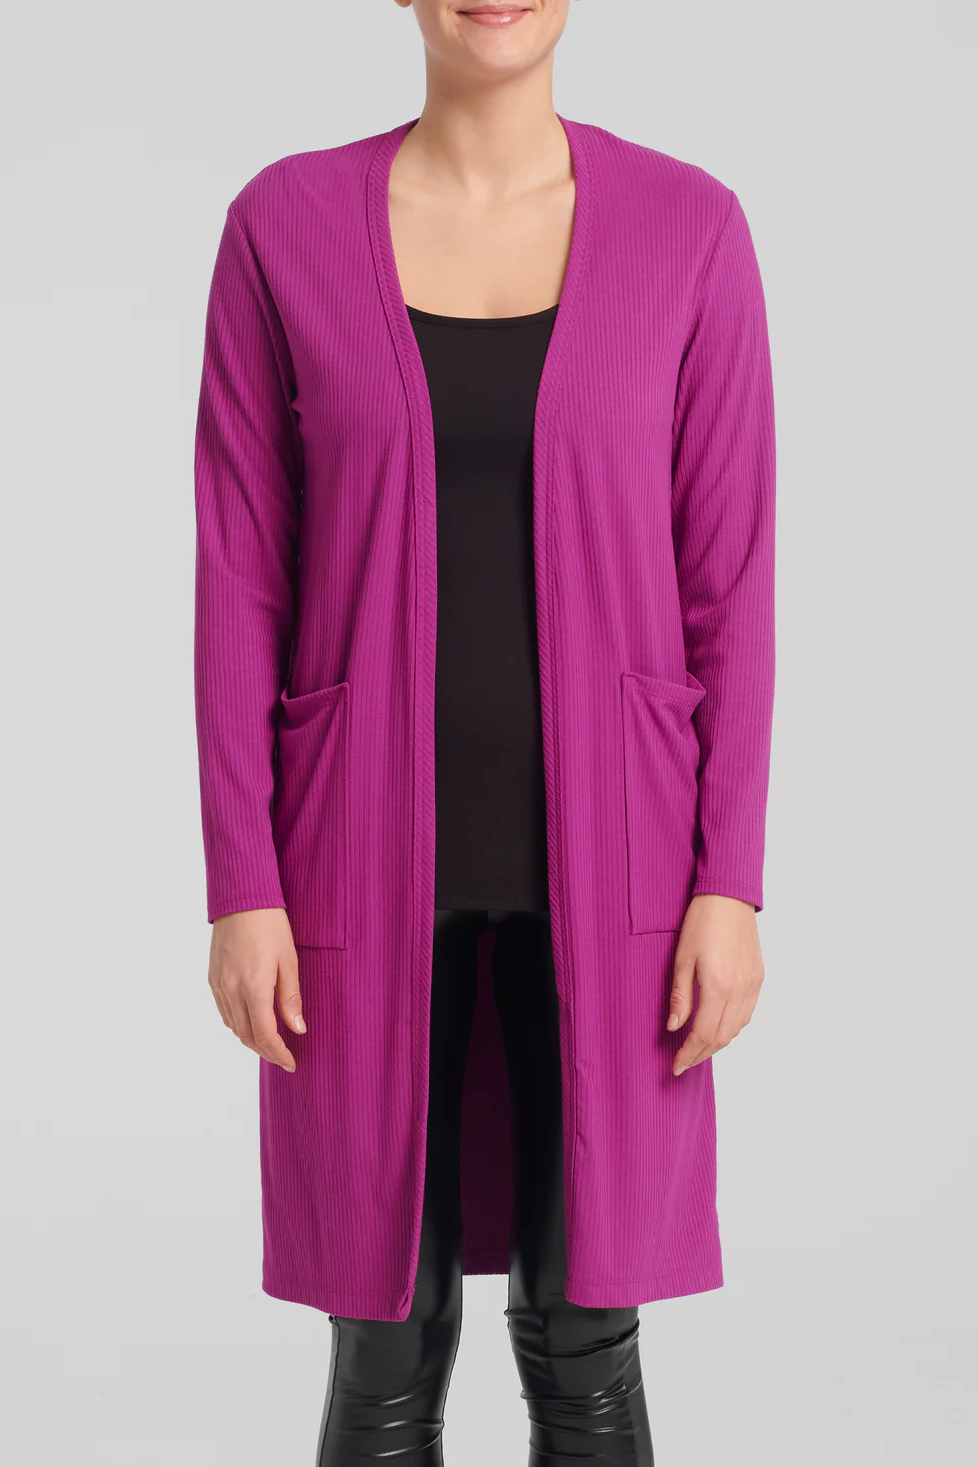 Streliski Cardigan by Kollontai, Amethyst, long open cardigan, patch pockets, eco-fabric, ribbed bamboo knit, sizes XS to XXL, made in Montreal 